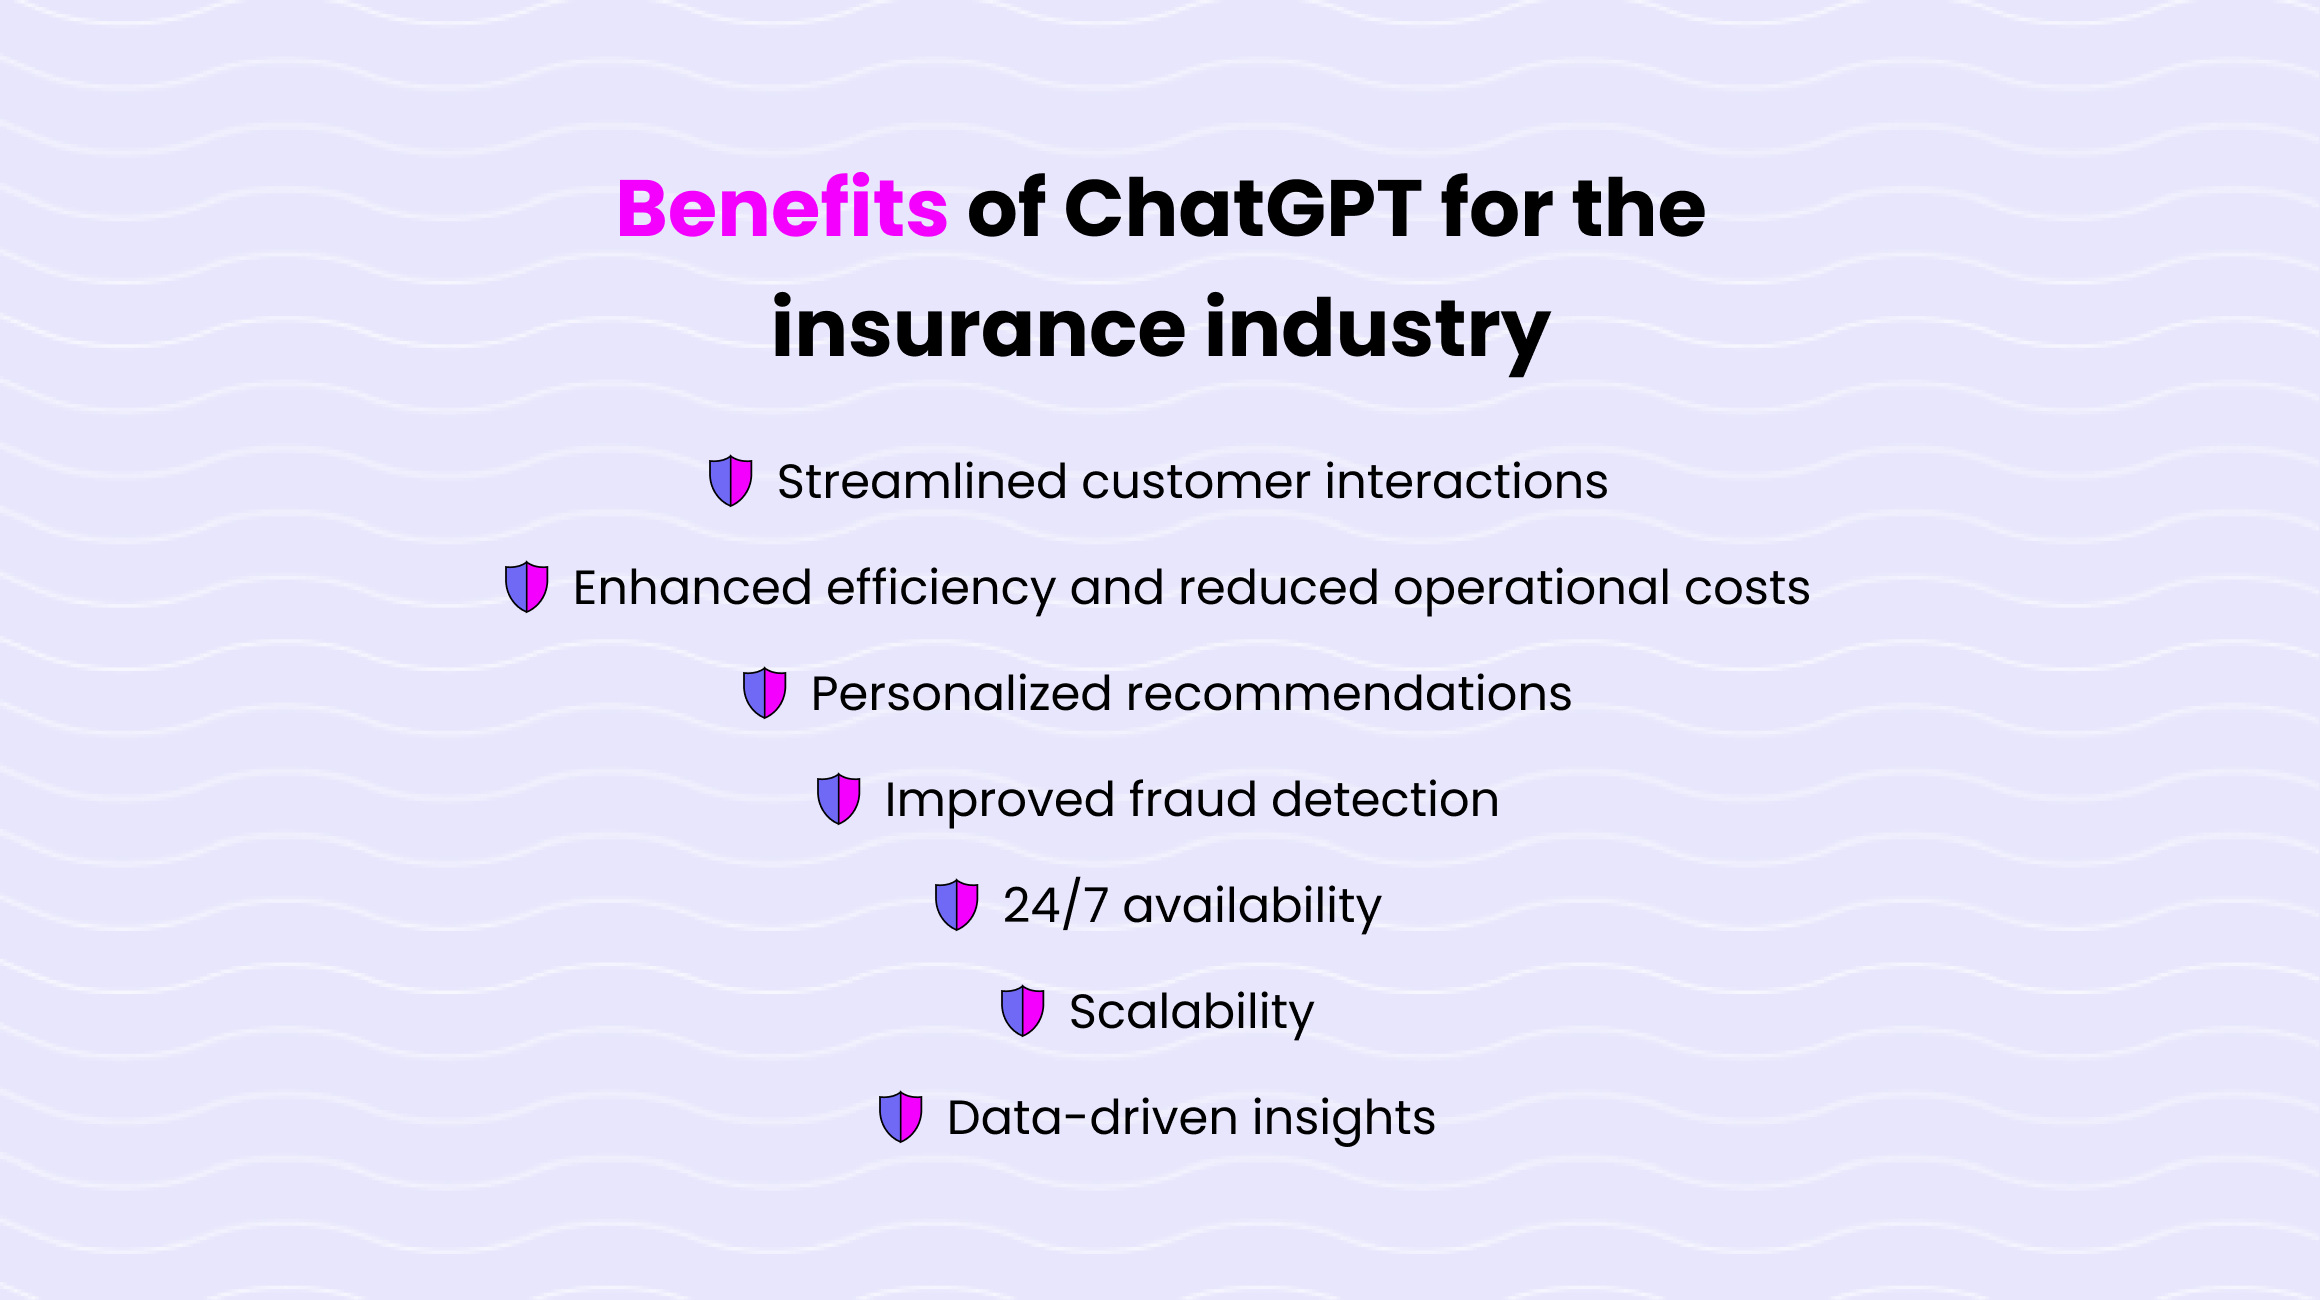 Benefits of ChatGPT for Insurance